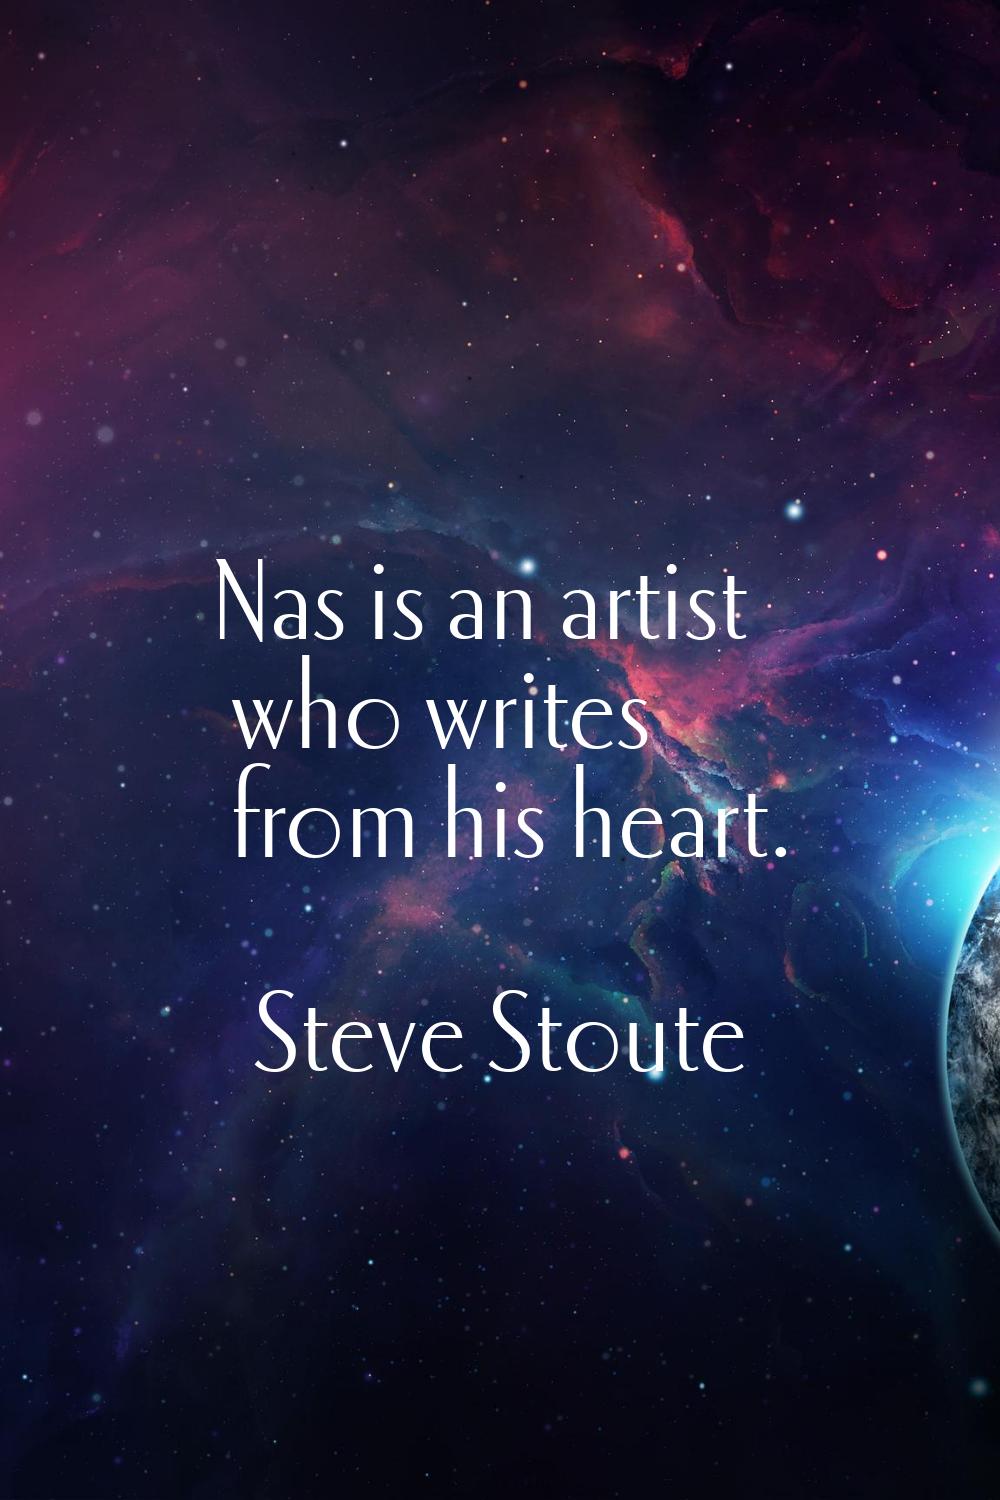 Nas is an artist who writes from his heart.